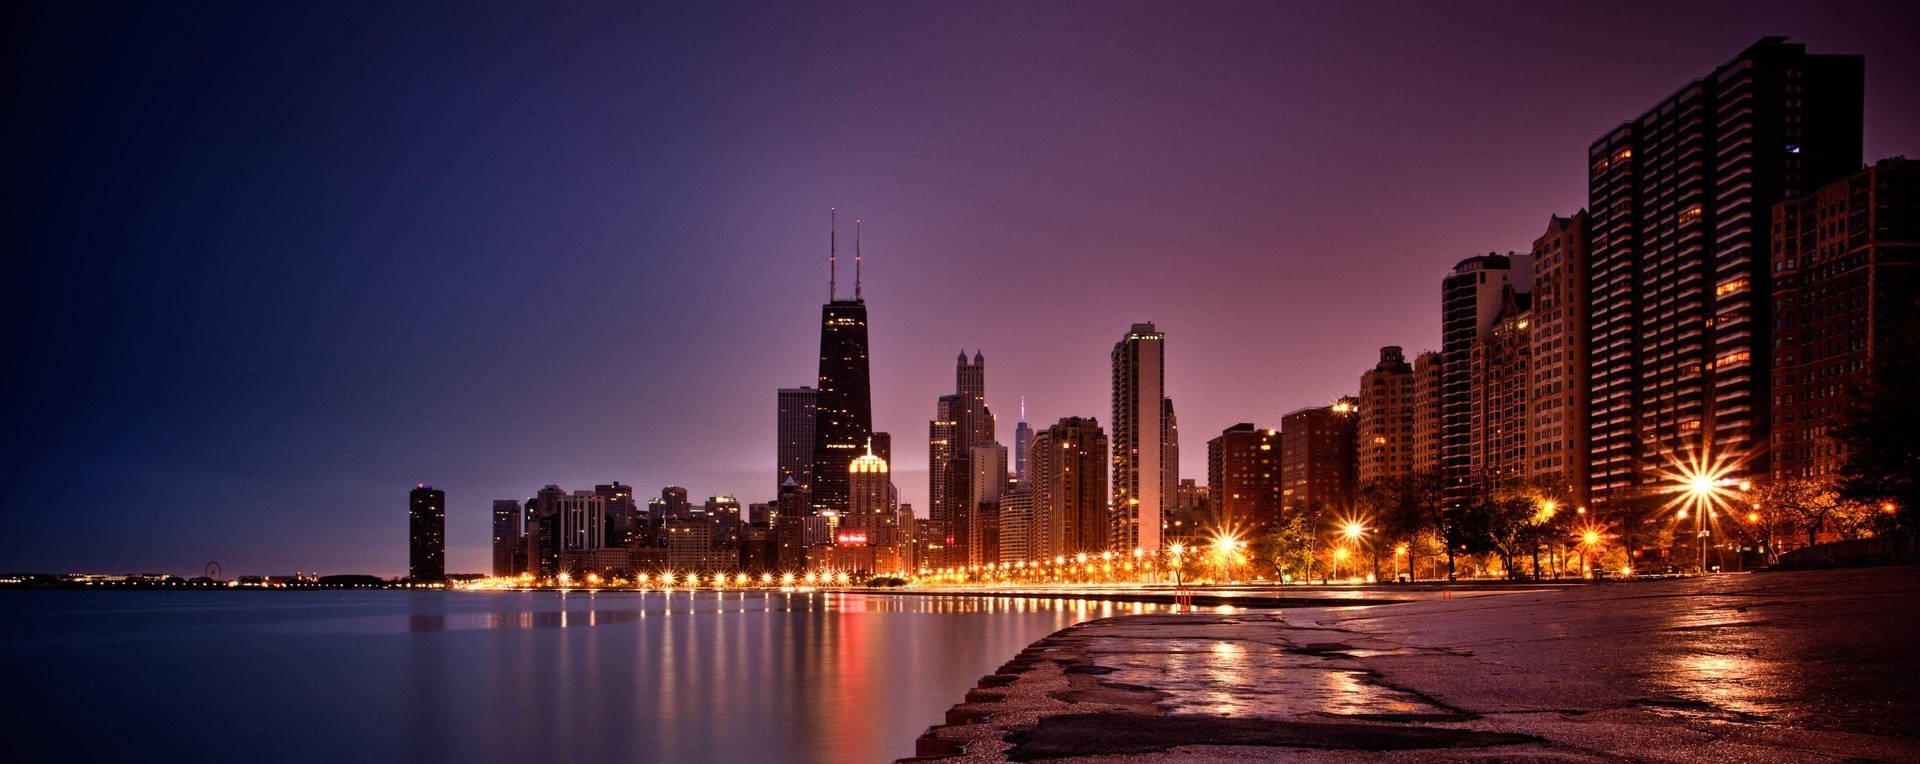 Download Blue And Purple Chicago Skyline Wallpaper